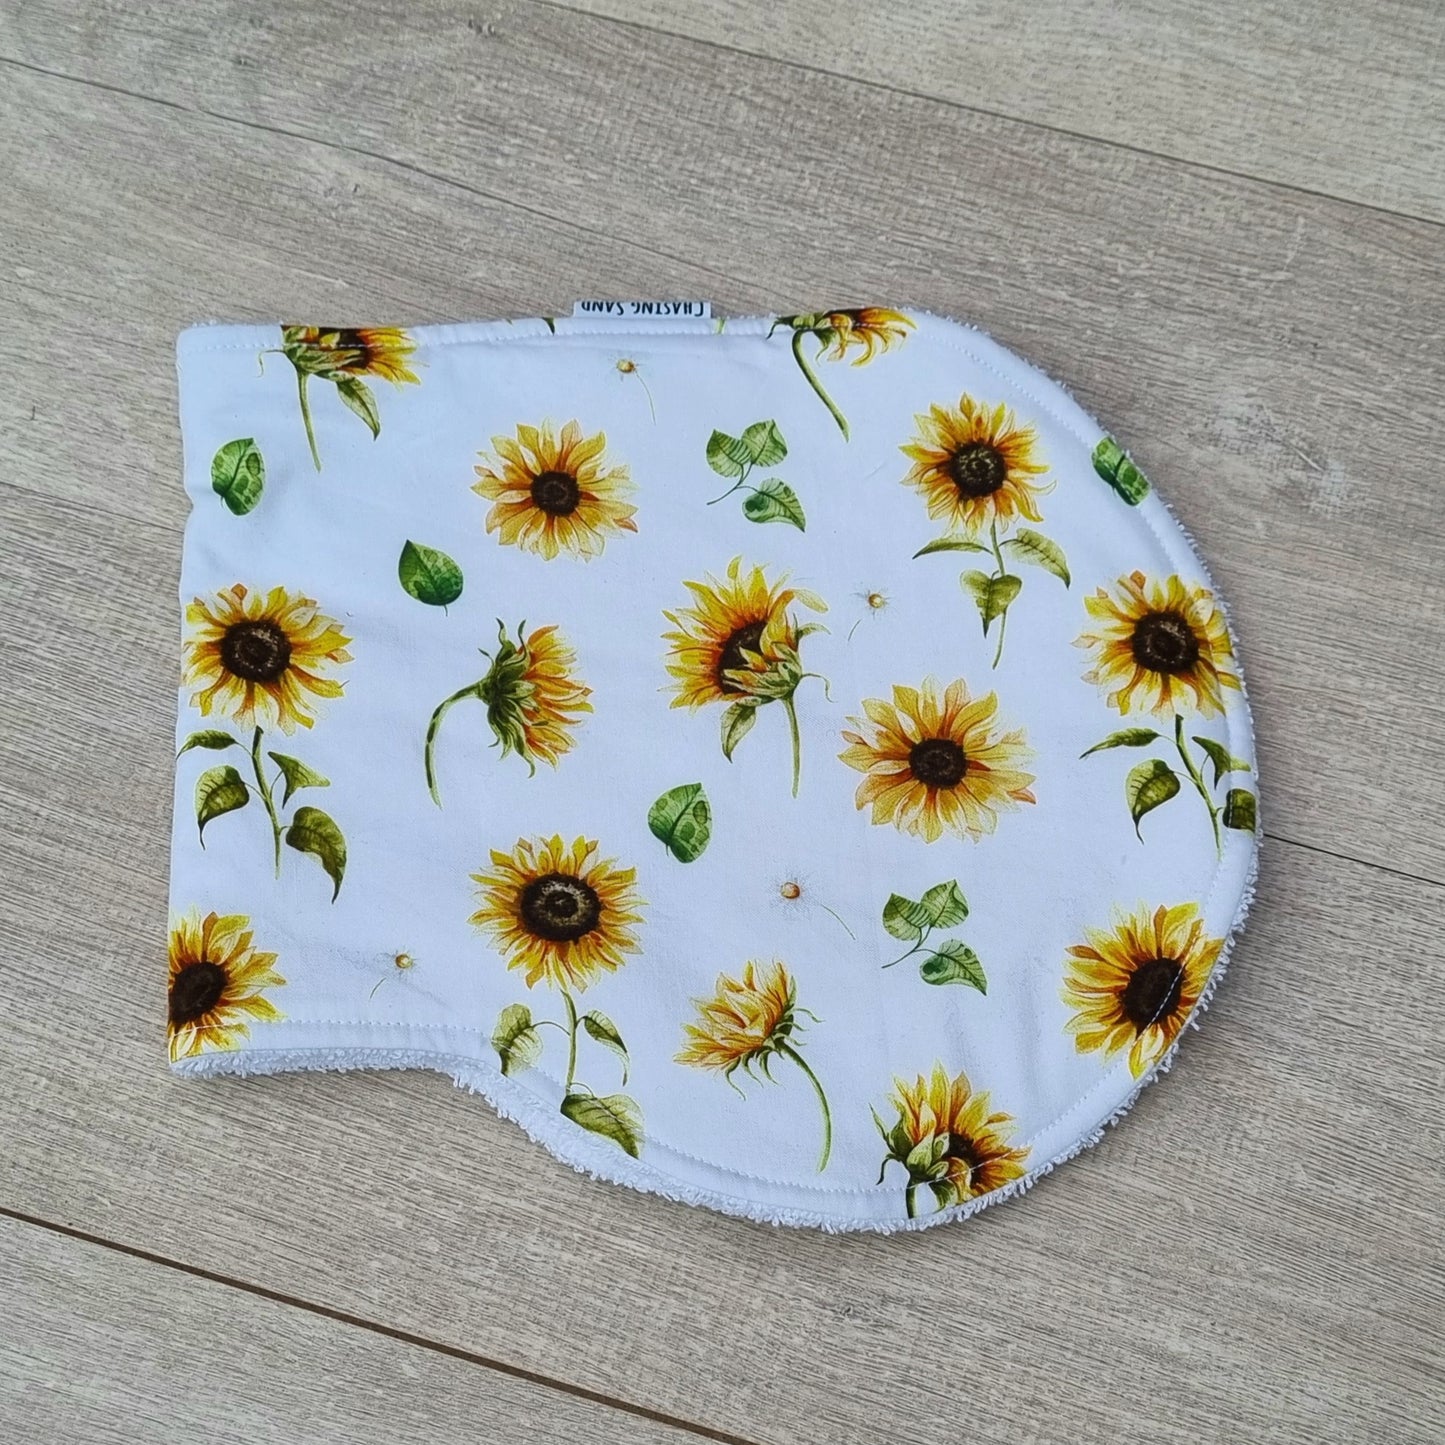 Burp Cloth - Sunflowers against wooden backdrop. Yellow sunflowers on white background.